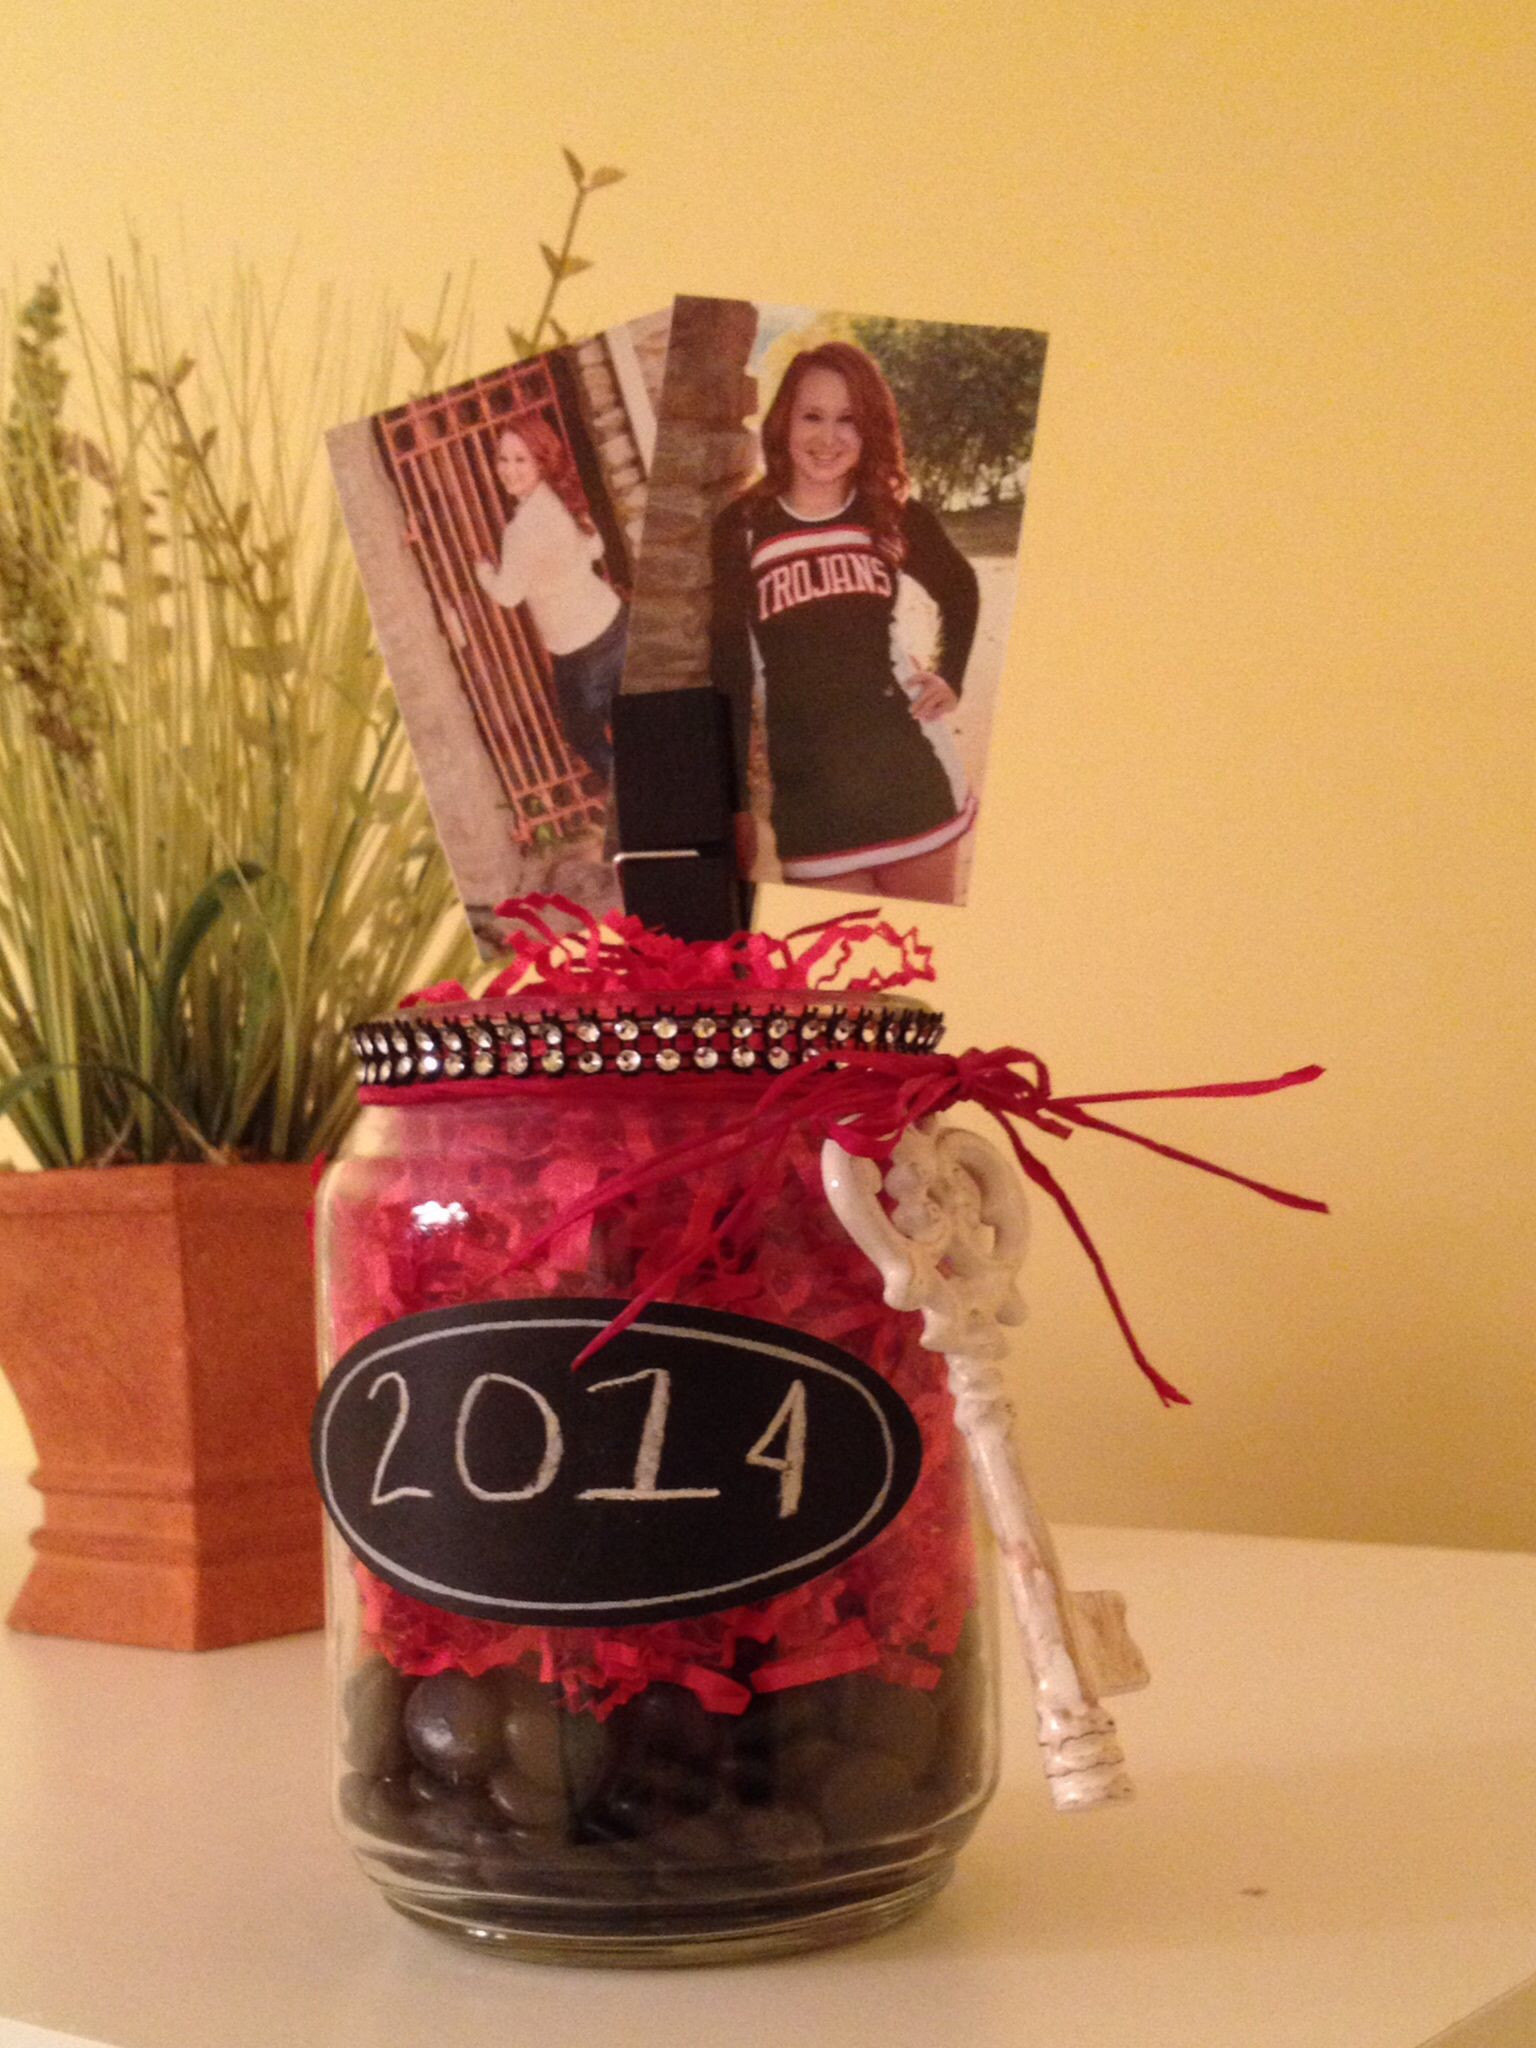 Red White And Black Graduation Party Ideas
 Graduation Party Centerpieces But with Orange and Black